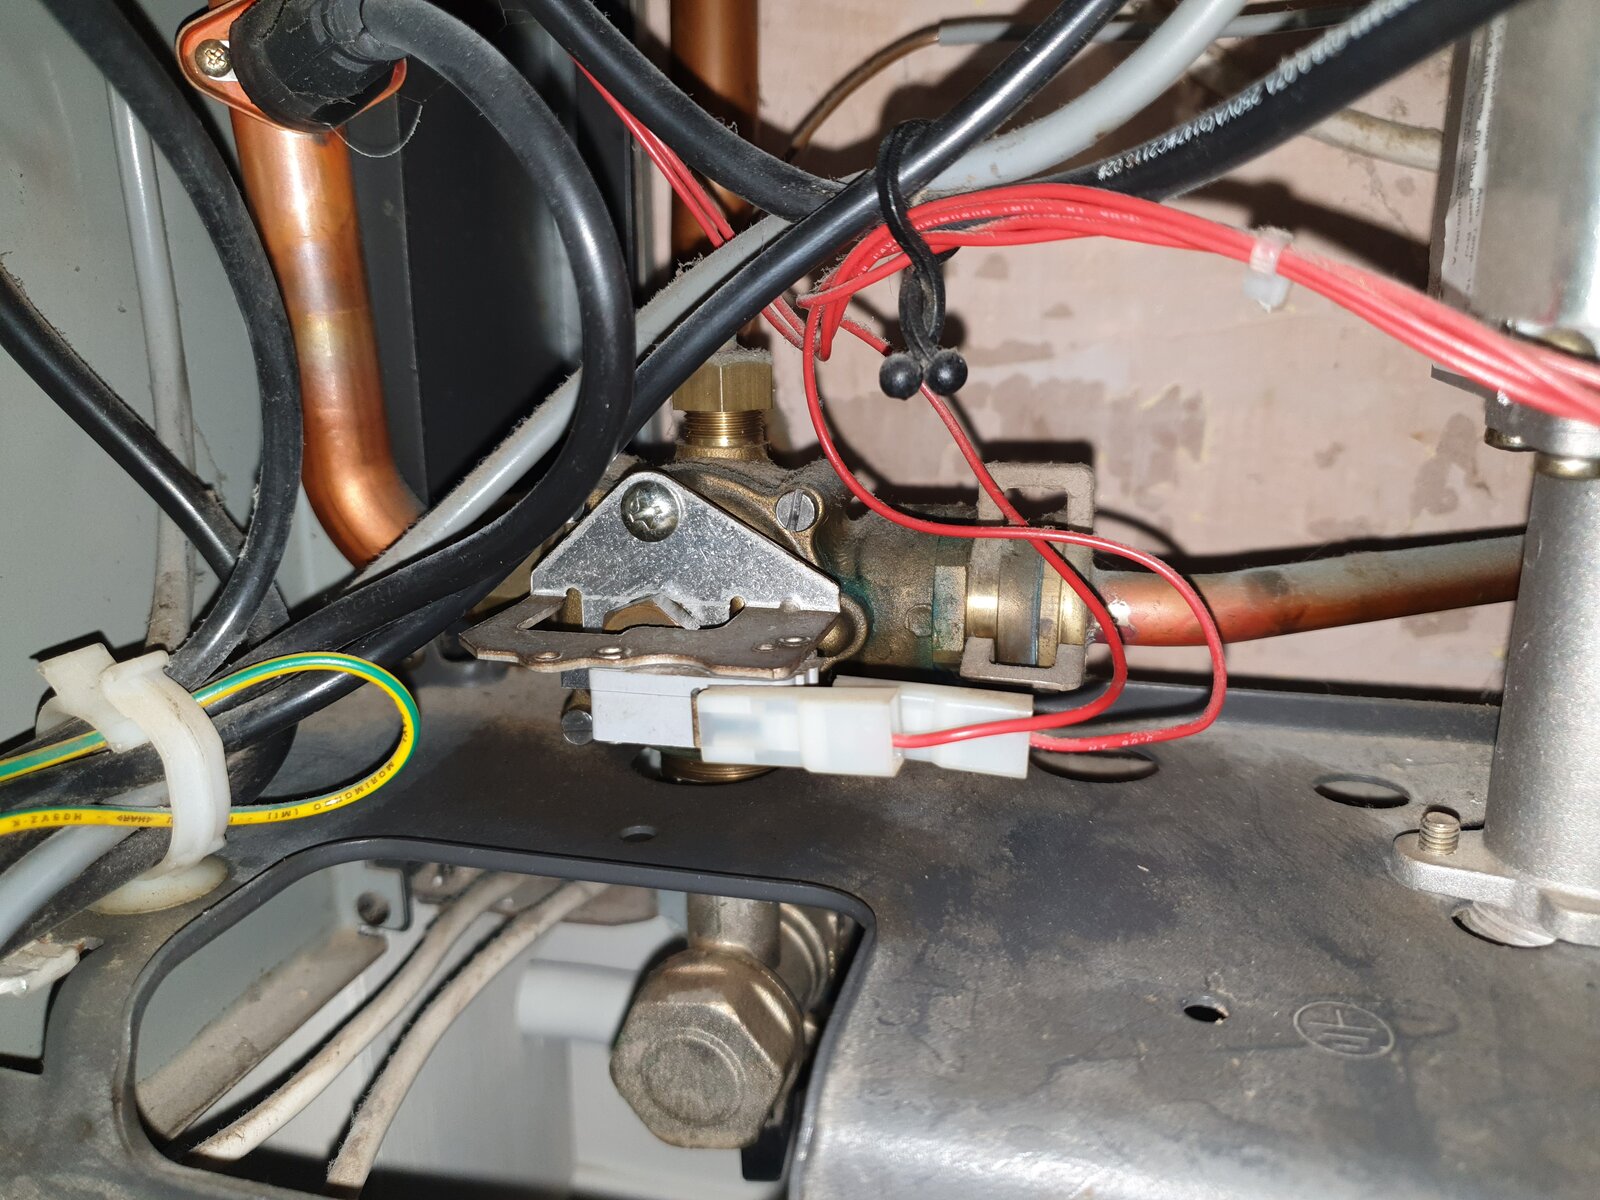 Clean pump proving pin (Baxi System 35/60) | Page 2 | DIYnot Forums